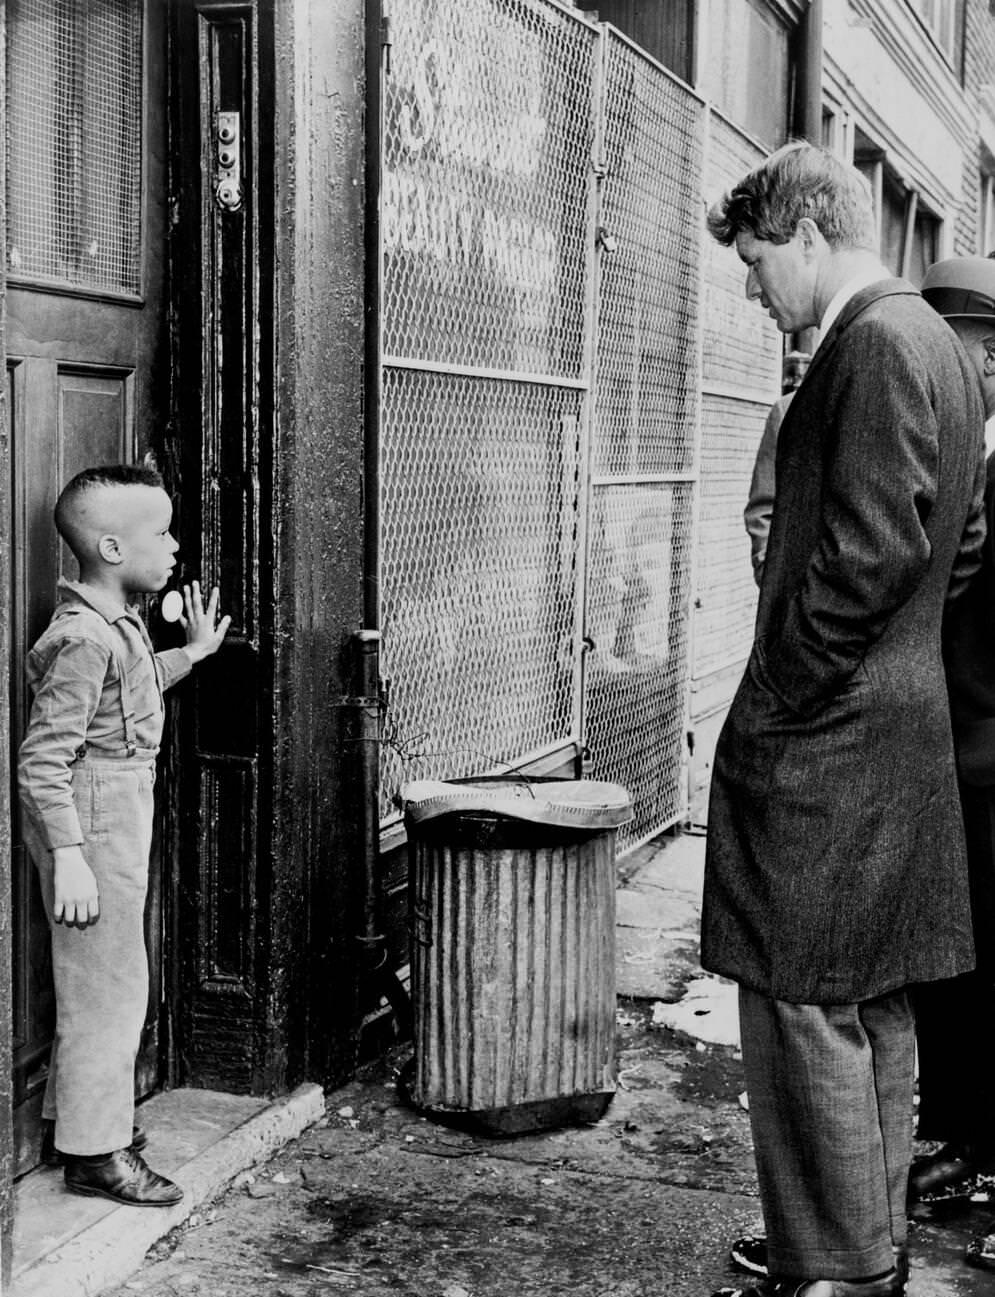 Senator Robert Kennedy Discusses School With Ricky Taggart In Brooklyn.